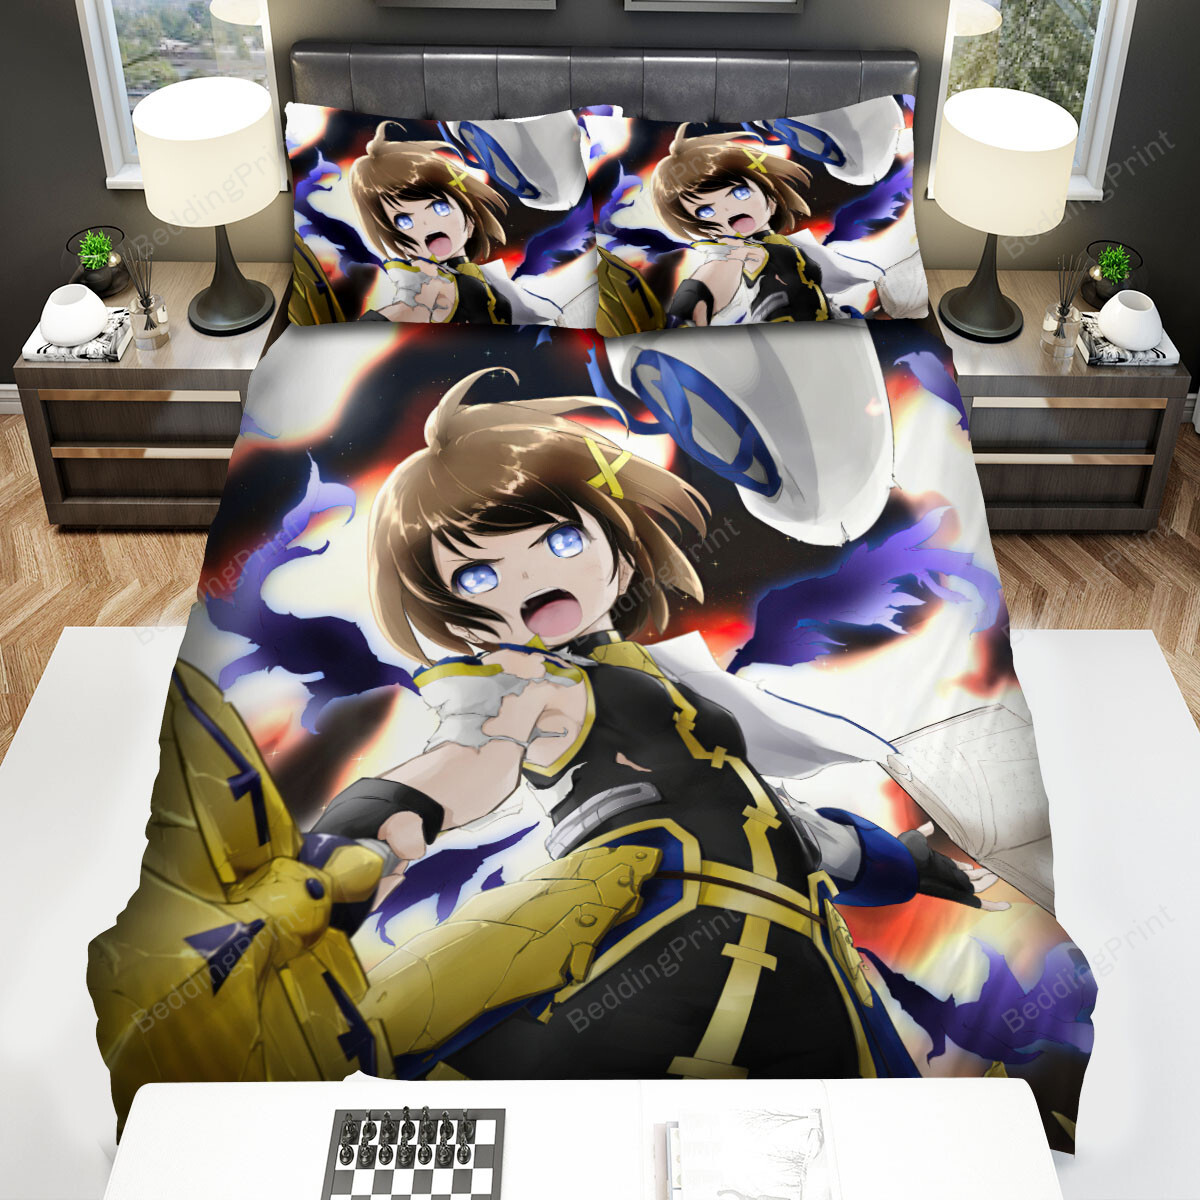 Share 77+ anime bed sheets - in.cdgdbentre